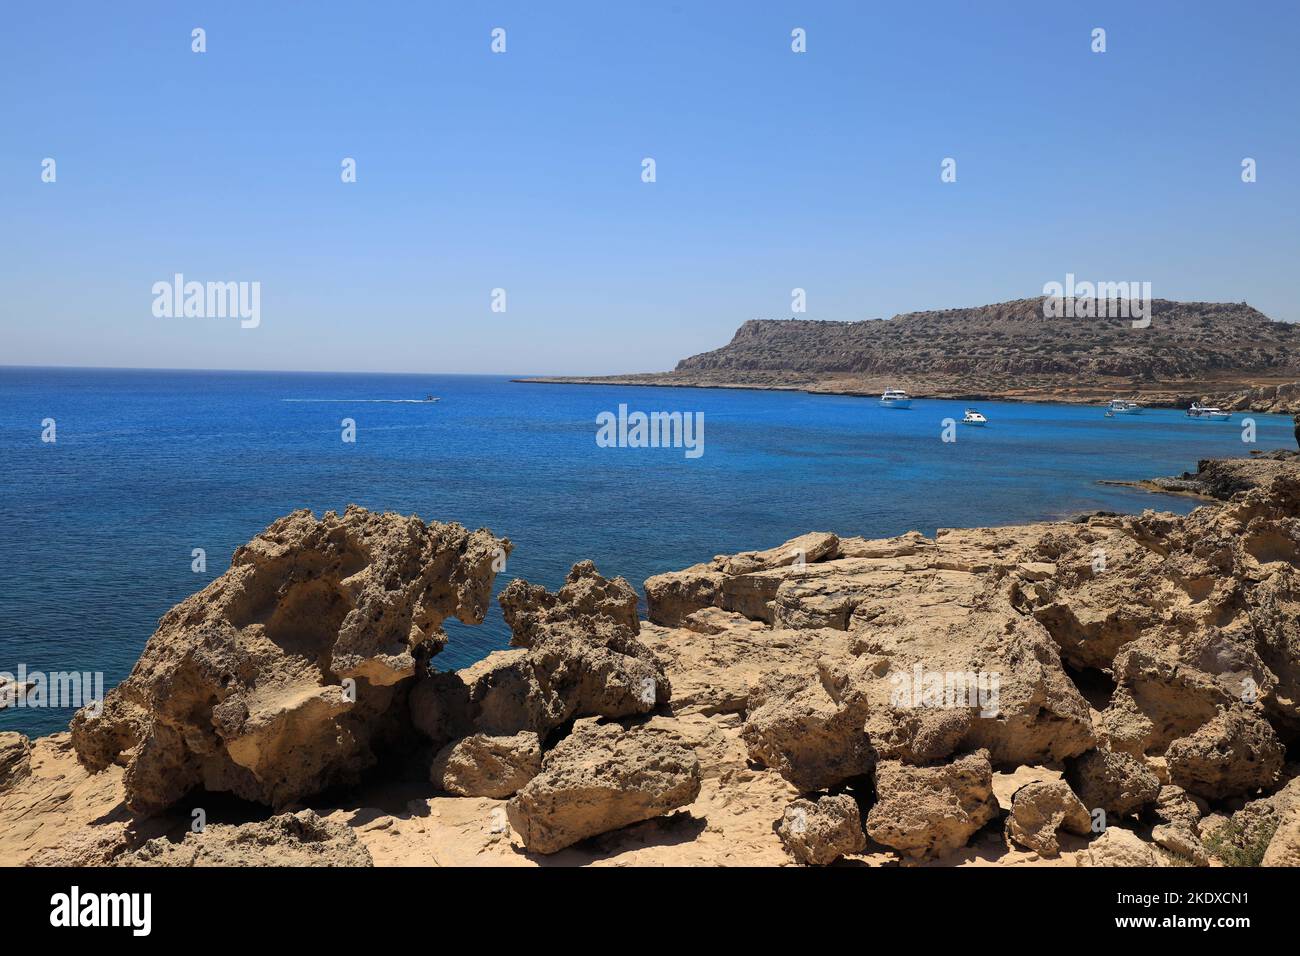 May 26, 2022, Larnaca, Cyprus: Deep blue Mediterranean Sea at Cape Greco National Forest Park at the southern end of Famagusta Bay and forms part of Ayia Napa Municipality. The Republic of Cyprus stands at a historic and cultural crossroads between Europe and Asia. Its chief cities-the capital of Nicosia, Limassol, Famagusta, and Paphos have absorbed the influences of generations of conquerors, pilgrims, and travelers and have an air that is both cosmopolitan and provincial. Today Cyprus is a popular tourist destination for visitors from Europe, favored by honeymooners (Credit Image: © Ruarid Stock Photo